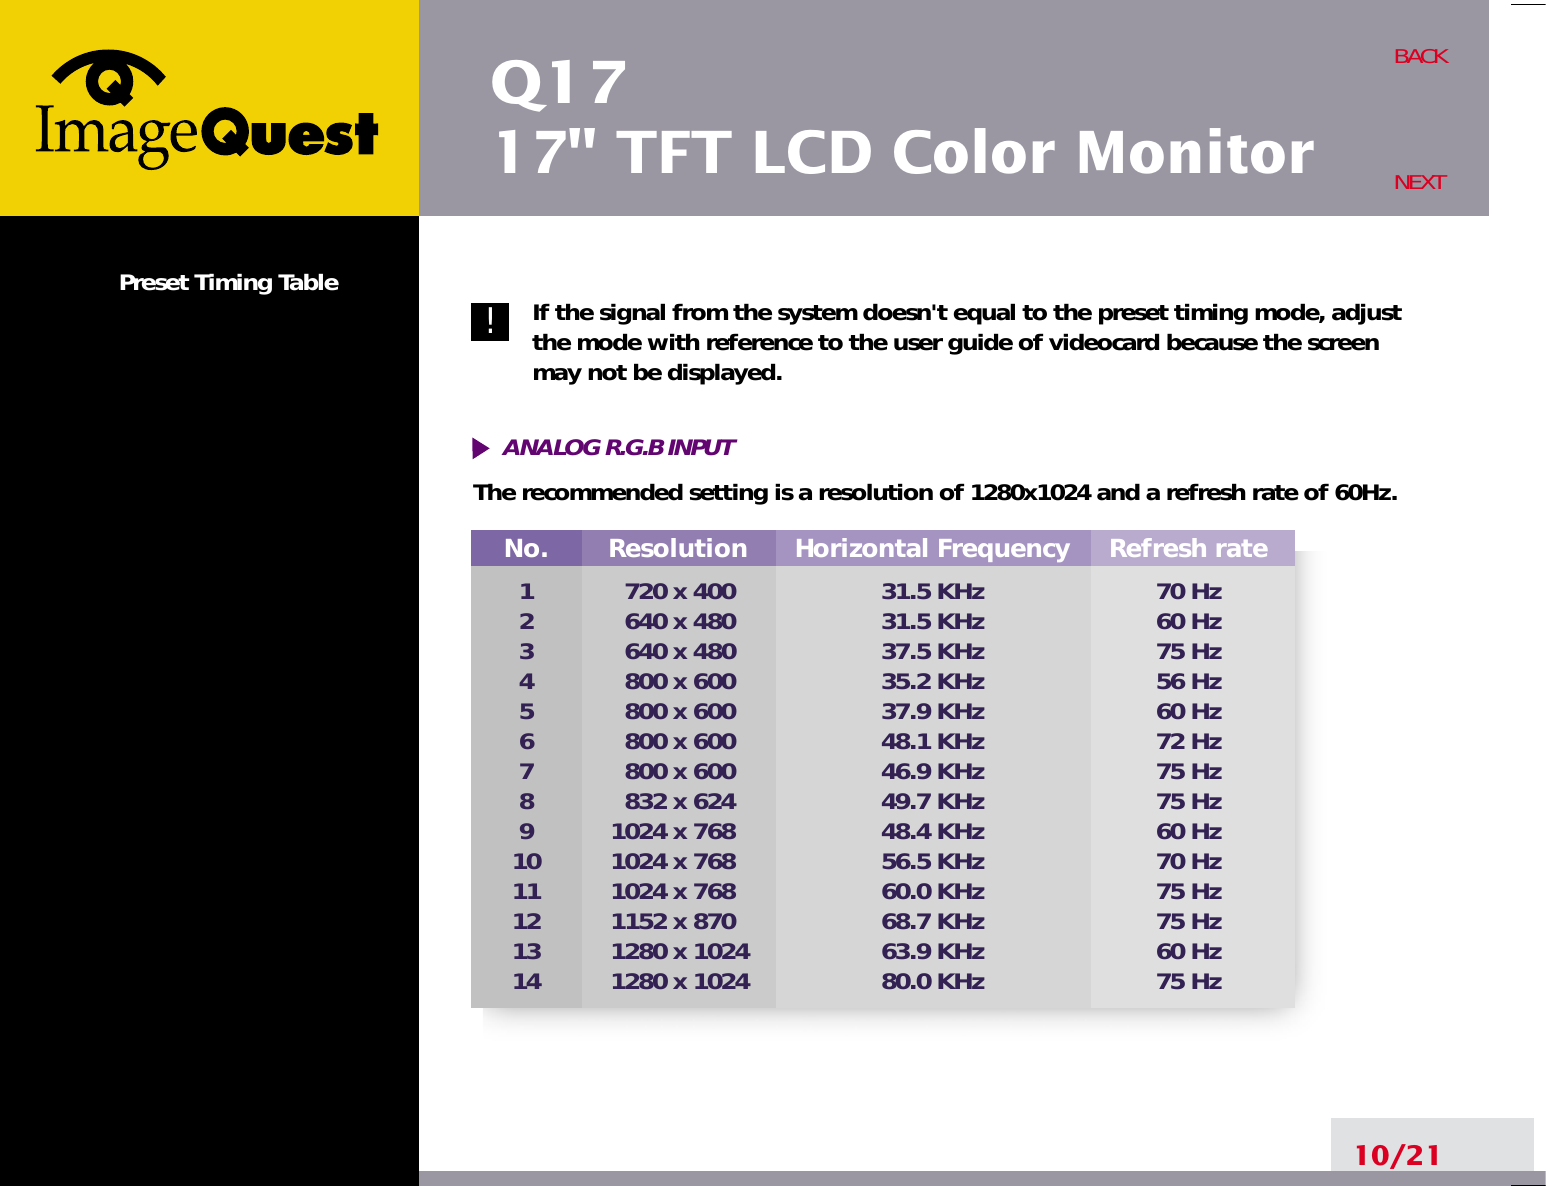 Q1717&quot; TFT LCD Color MonitorNo.1234567891011121314Resolution720 x 400640 x 480640 x 480 800 x 600800 x 600800 x 600800 x 600832 x 6241024 x 7681024 x 7681024 x 7681152 x 8701280 x 10241280 x 1024Horizontal Frequency31.5 KHz31.5 KHz37.5 KHz35.2 KHz37.9 KHz48.1 KHz46.9 KHz49.7 KHz48.4 KHz56.5 KHz60.0 KHz68.7 KHz63.9 KHz80.0 KHzRefresh rate70 Hz60 Hz75 Hz56 Hz60 Hz72 Hz75 Hz75 Hz60 Hz70 Hz75 Hz75 Hz60 Hz75 HzPreset Timing Table If the signal from the system doesn&apos;t equal to the preset timing mode, adjustthe mode with reference to the user guide of videocard because the screenmay not be displayed.The recommended setting is a resolution of 1280x1024 and a refresh rate of 60Hz.10/21BACKNEXT!ANALOG R.G.B INPUT 